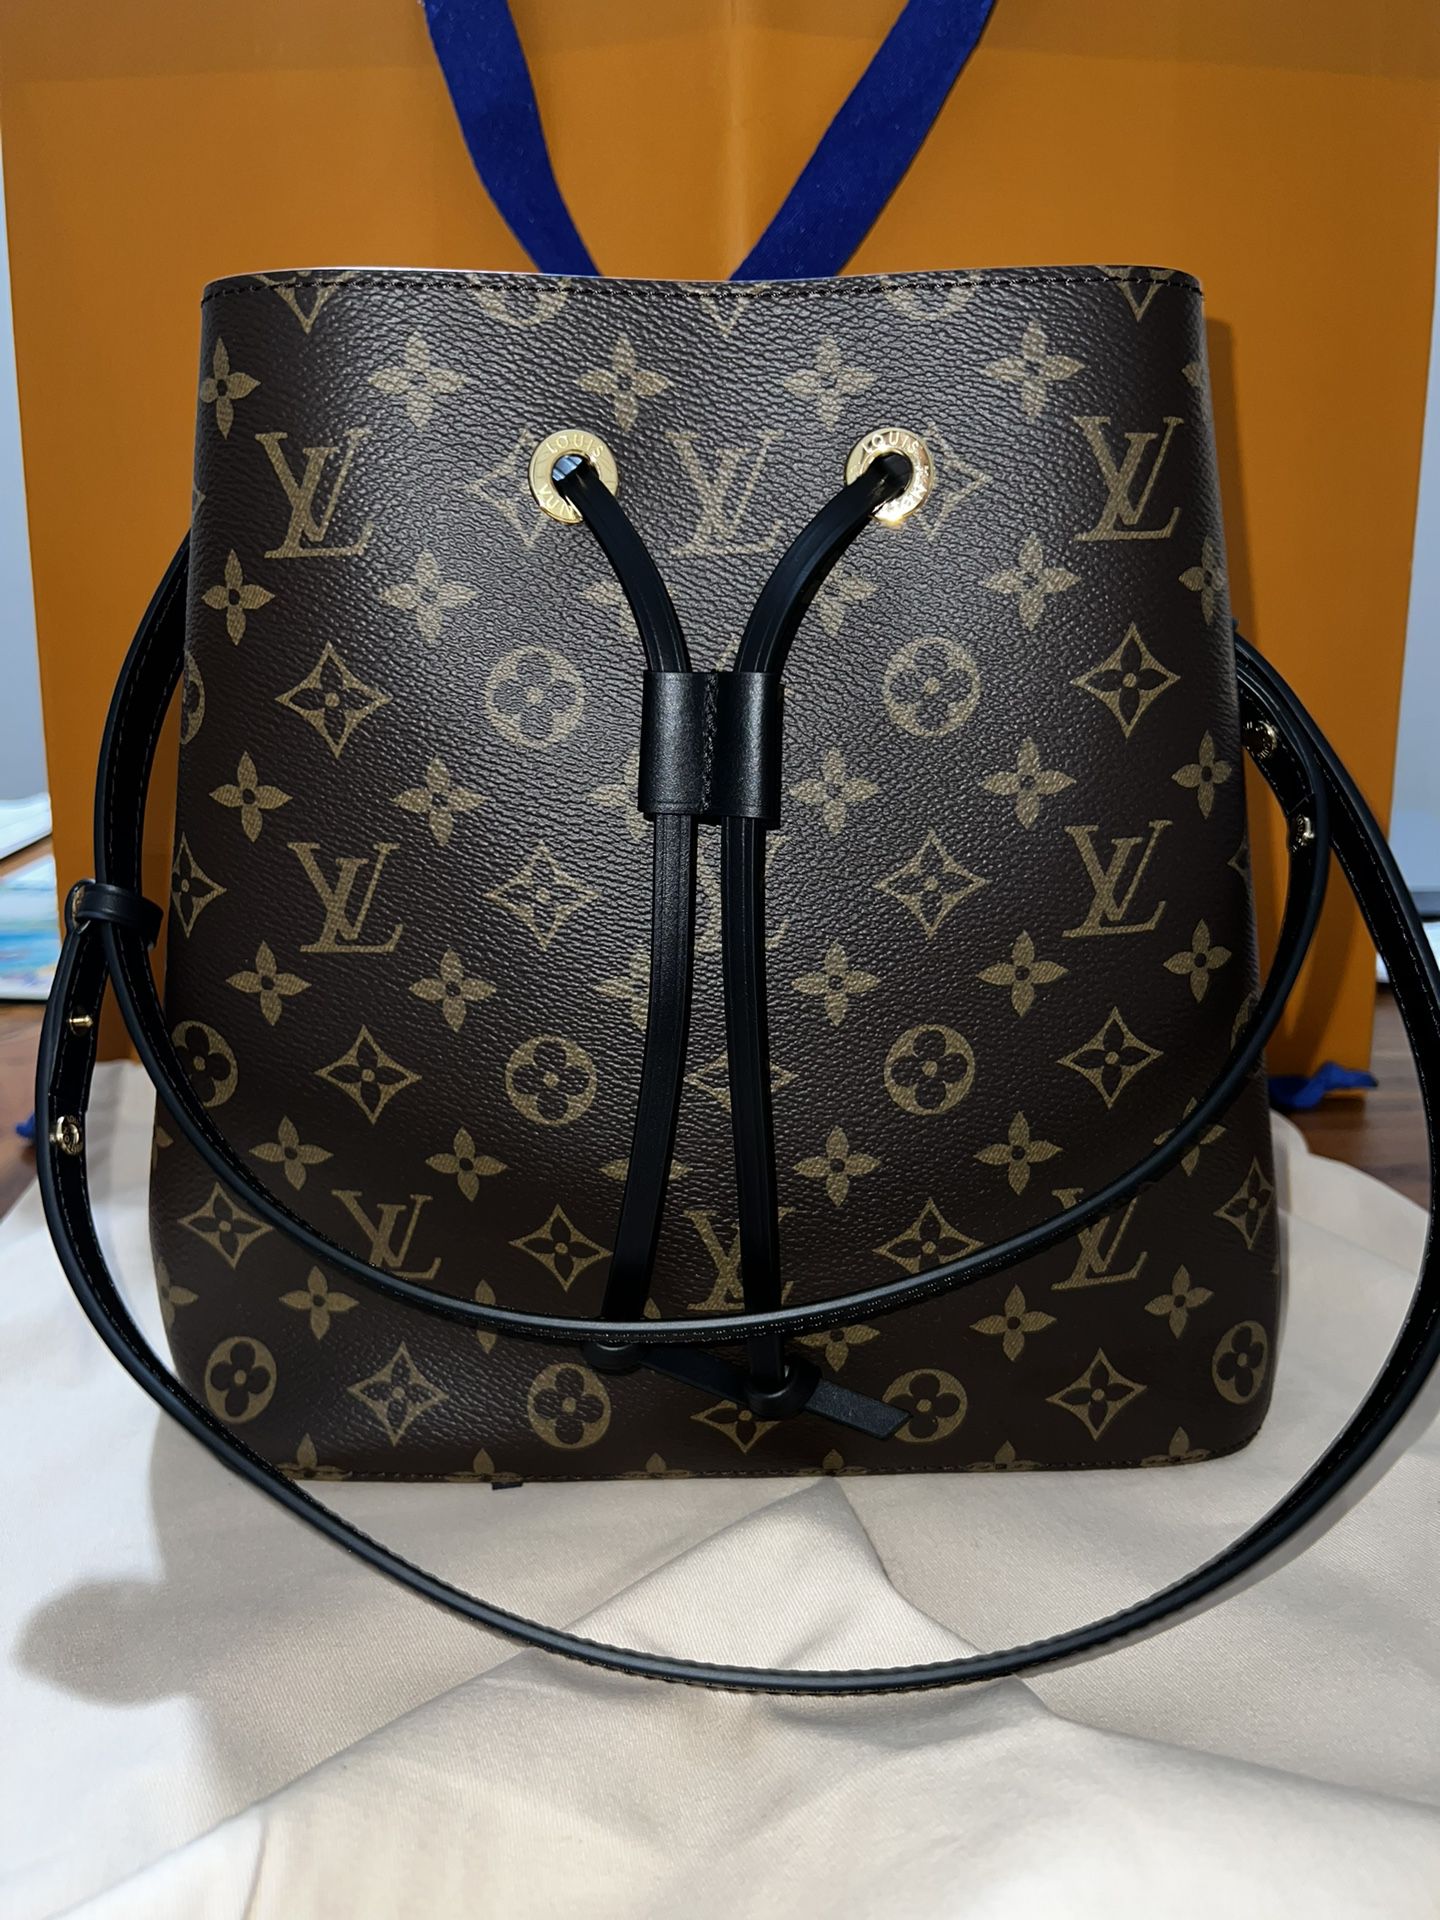 Gorgeous LV Purse for Sale in Katy, TX - OfferUp